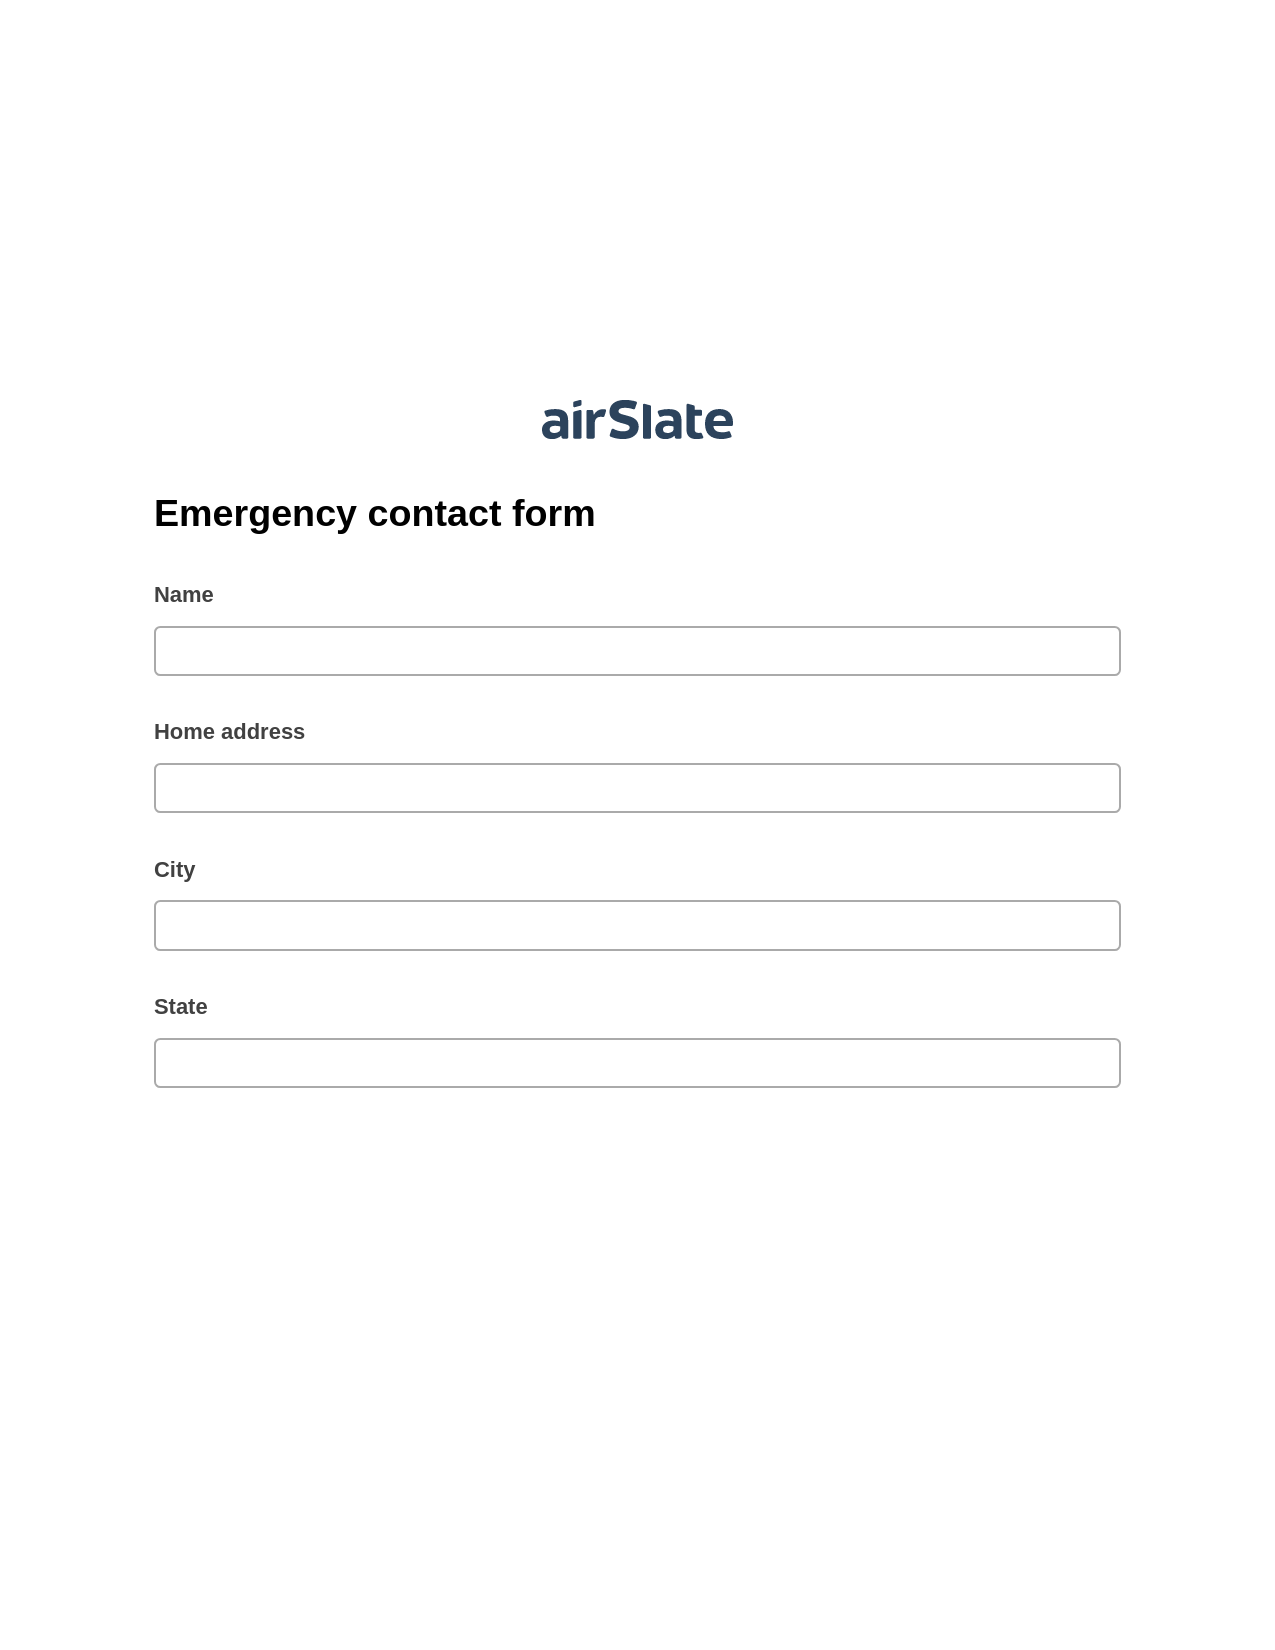 Emergency contact form Pre-fill from Google Sheet Dropdown Options Bot, Unassign Role Bot, OneDrive Bot